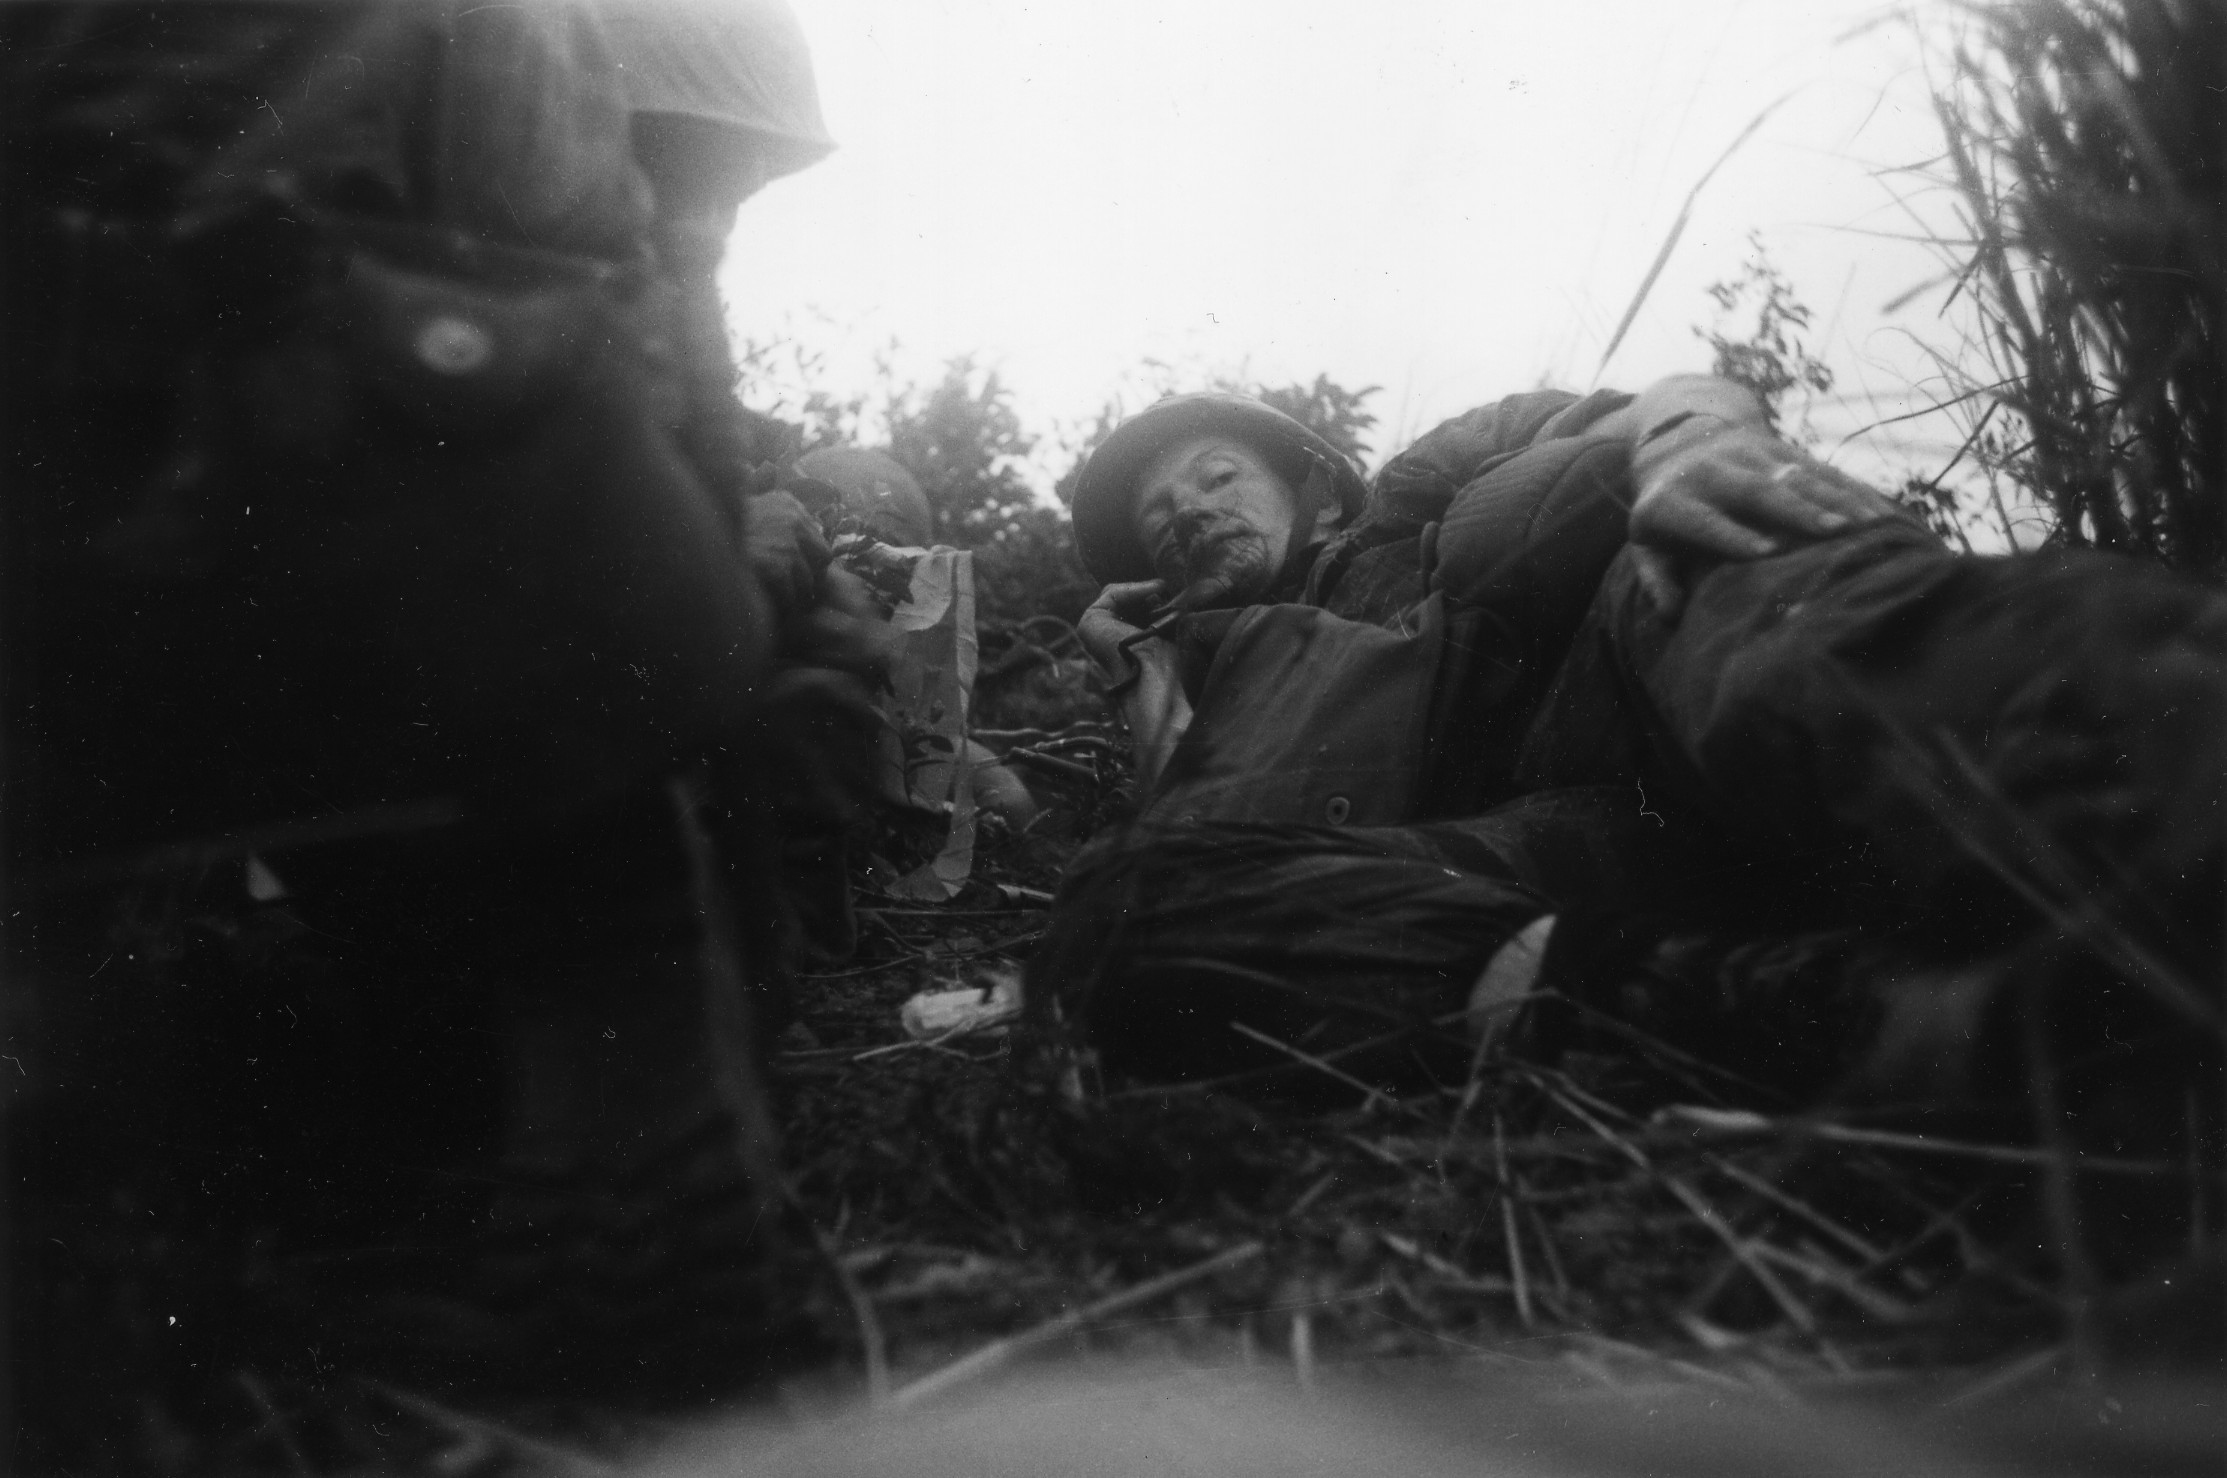 In the field: Wounded U.S. Marine Corps adviser Maj. William Leftwich Jr. shelters during a fire fight in Vietnam’s Binh Dinh province in 1965. | BUNYO ISHIKAWA